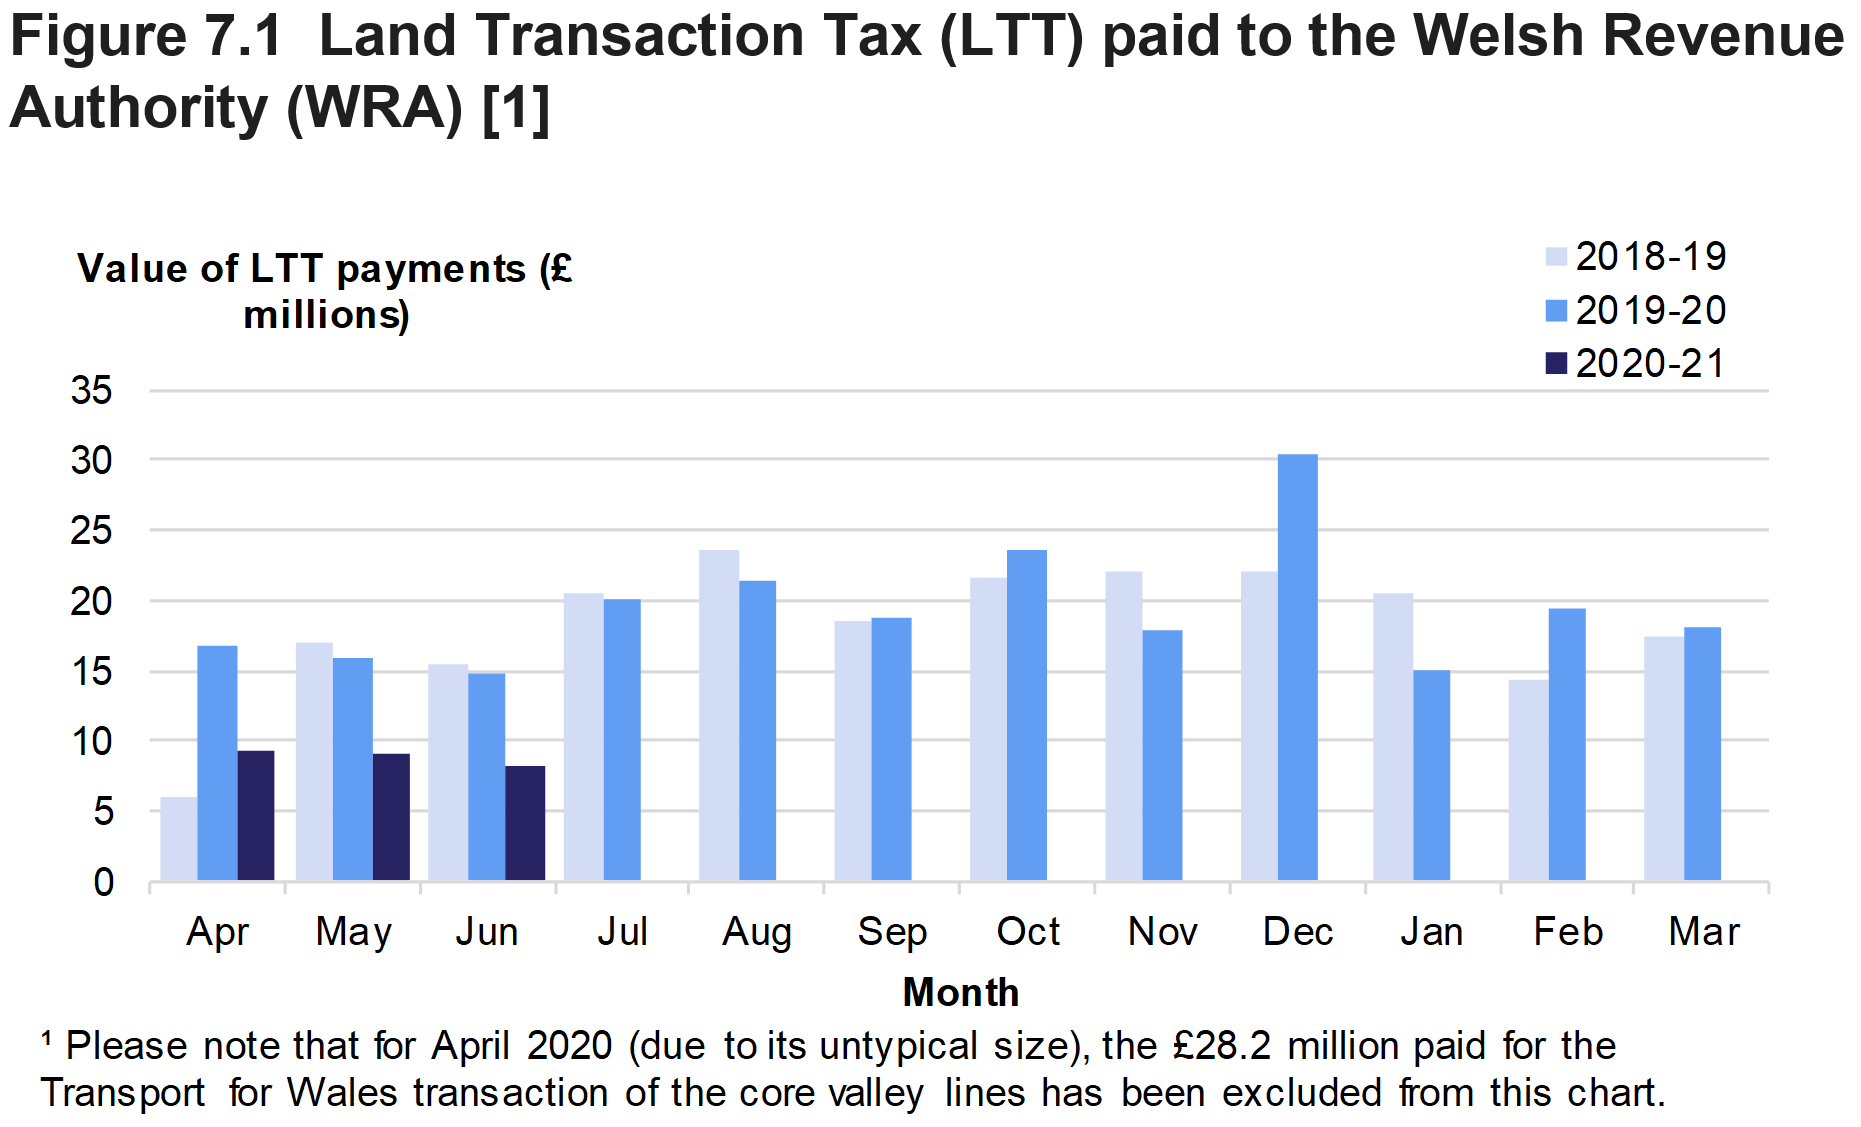 Figure 7.1 shows the monthly amounts of Land Transaction Tax paid to the Welsh Revenue Authority, for April 2018 to June 2020.